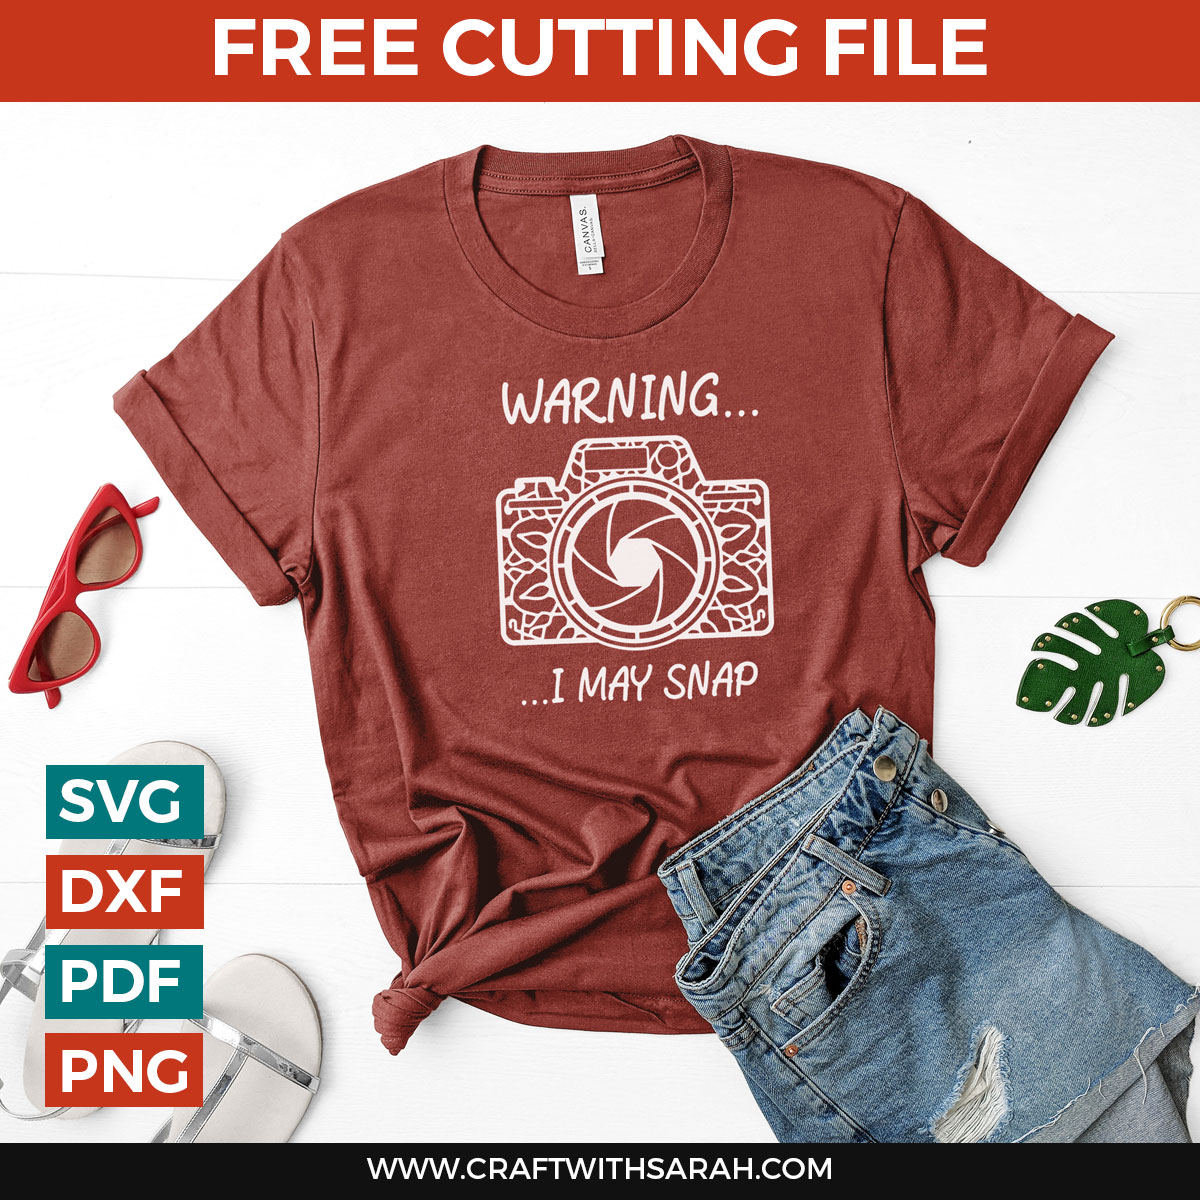 Download Free Svgs For Cricut Craft With Sarah